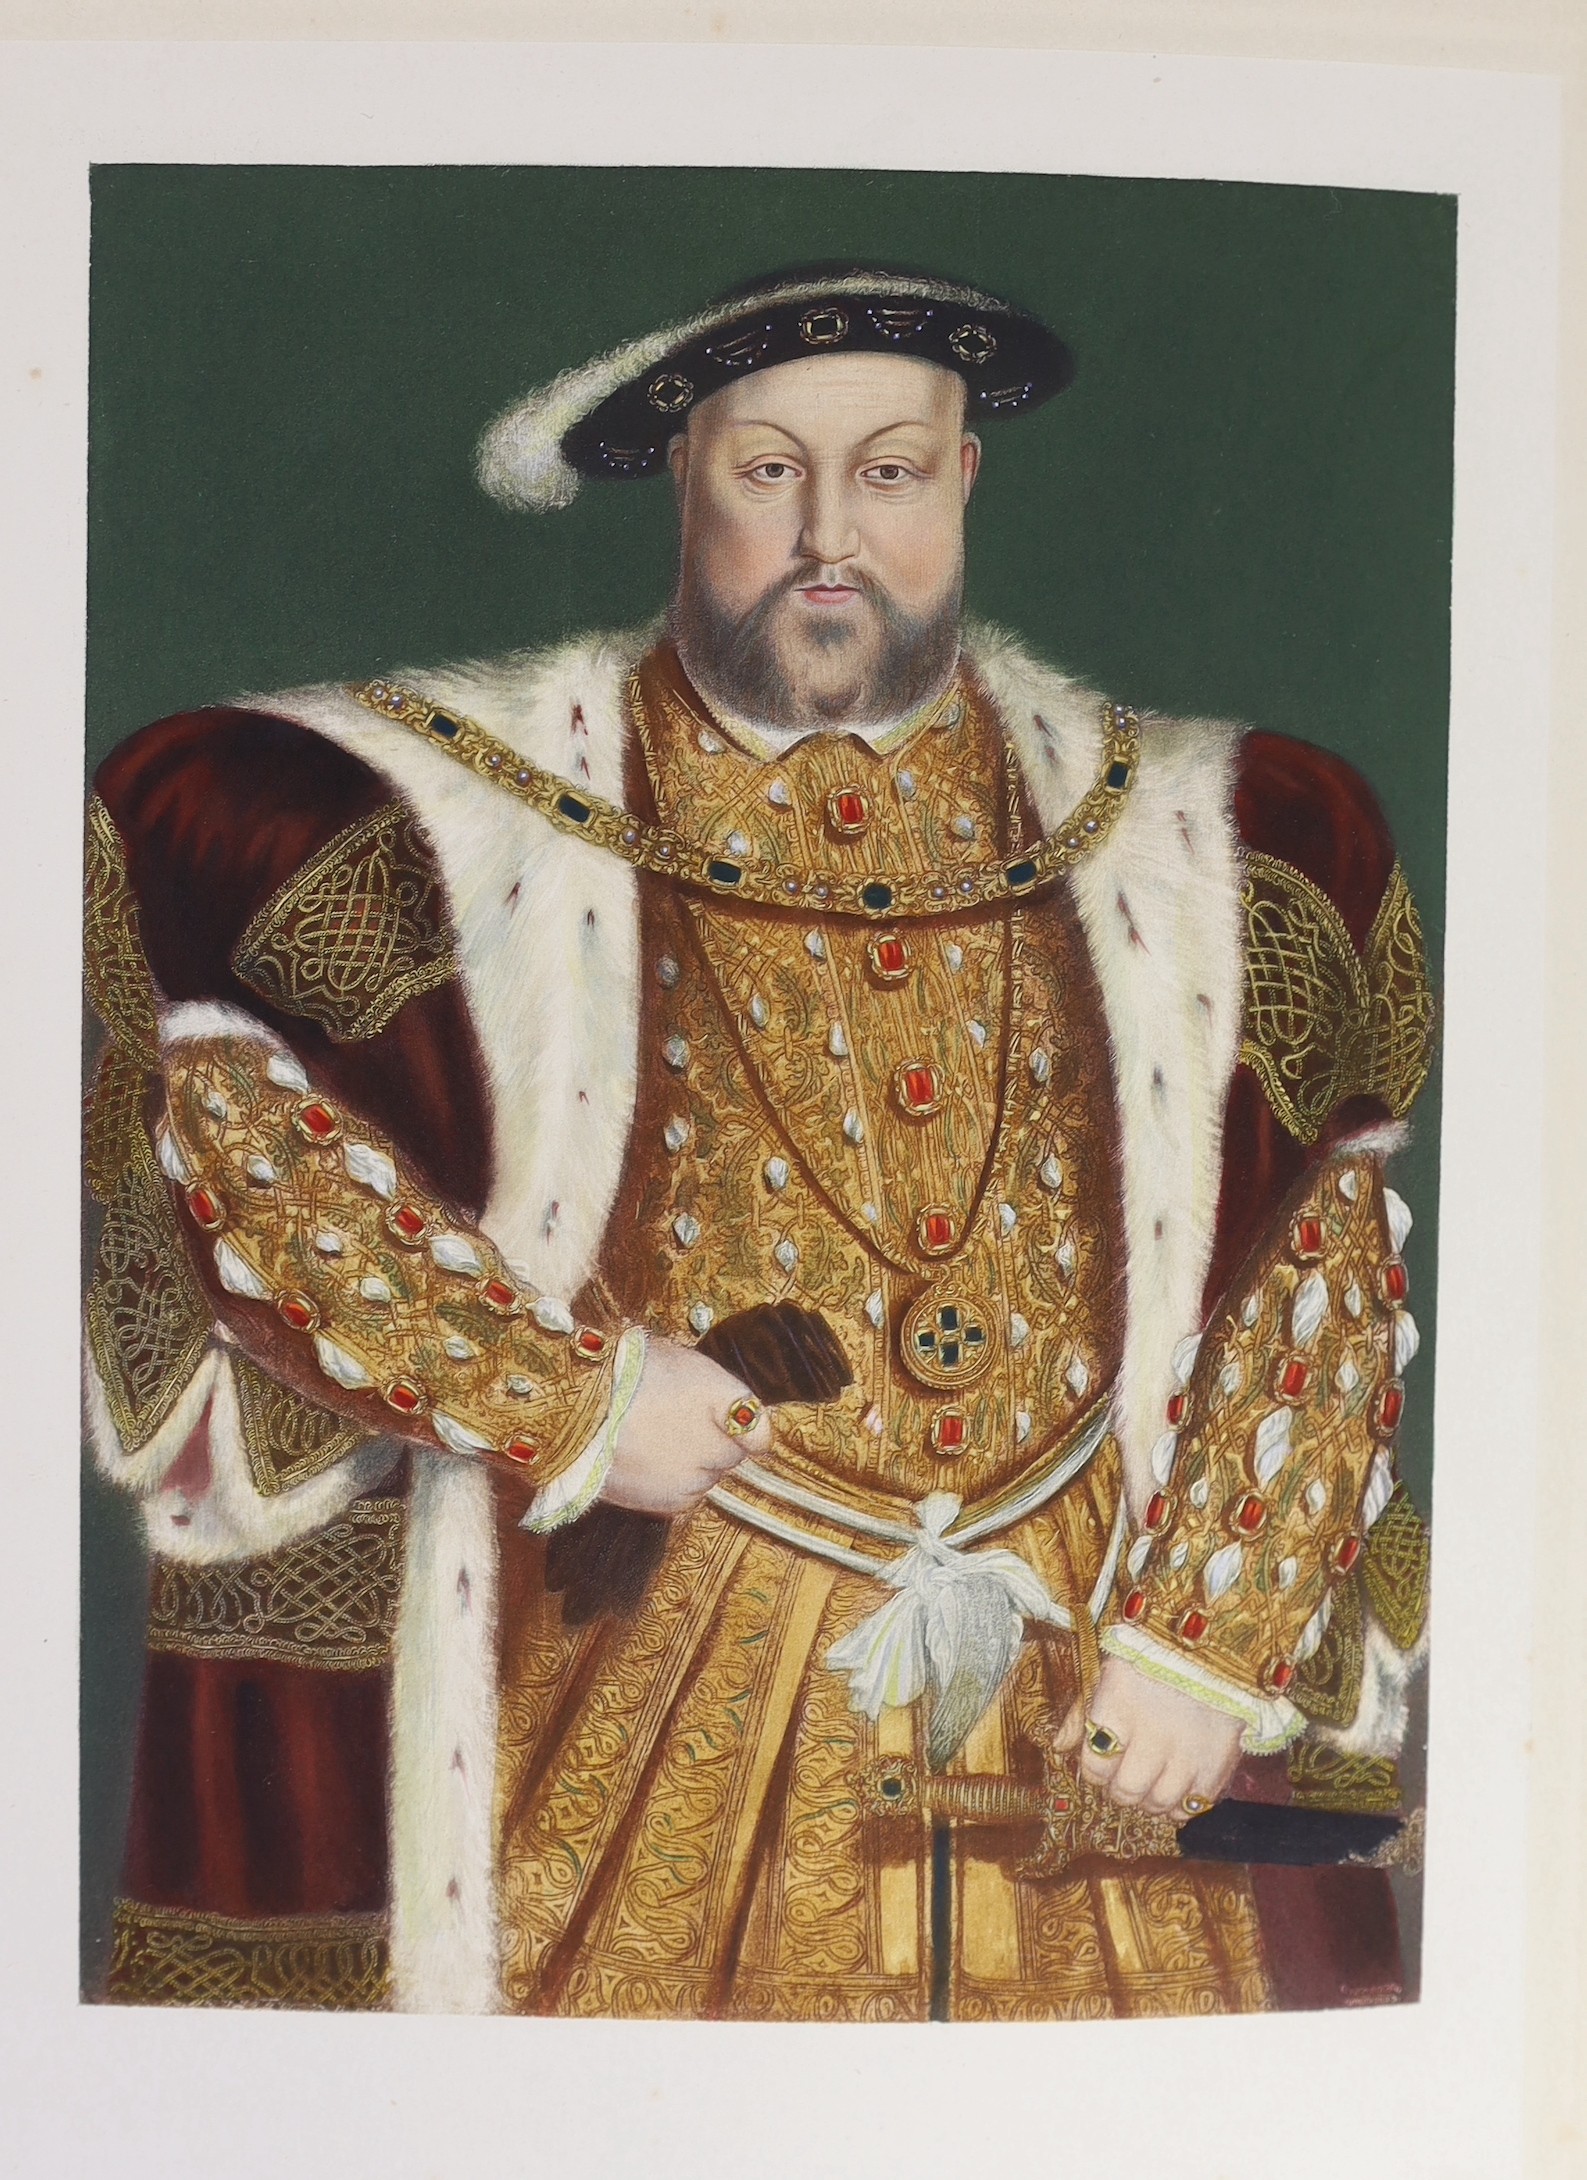 Pollard, A.F - Henry VIII, one of 1150, small folio, quarter calf, Goupil & Co., 1902, uniformly bound with - Lang, Andrew - Prince Charles Edward, one of 1500, small folio, Goupil & Co., 1900 (2)